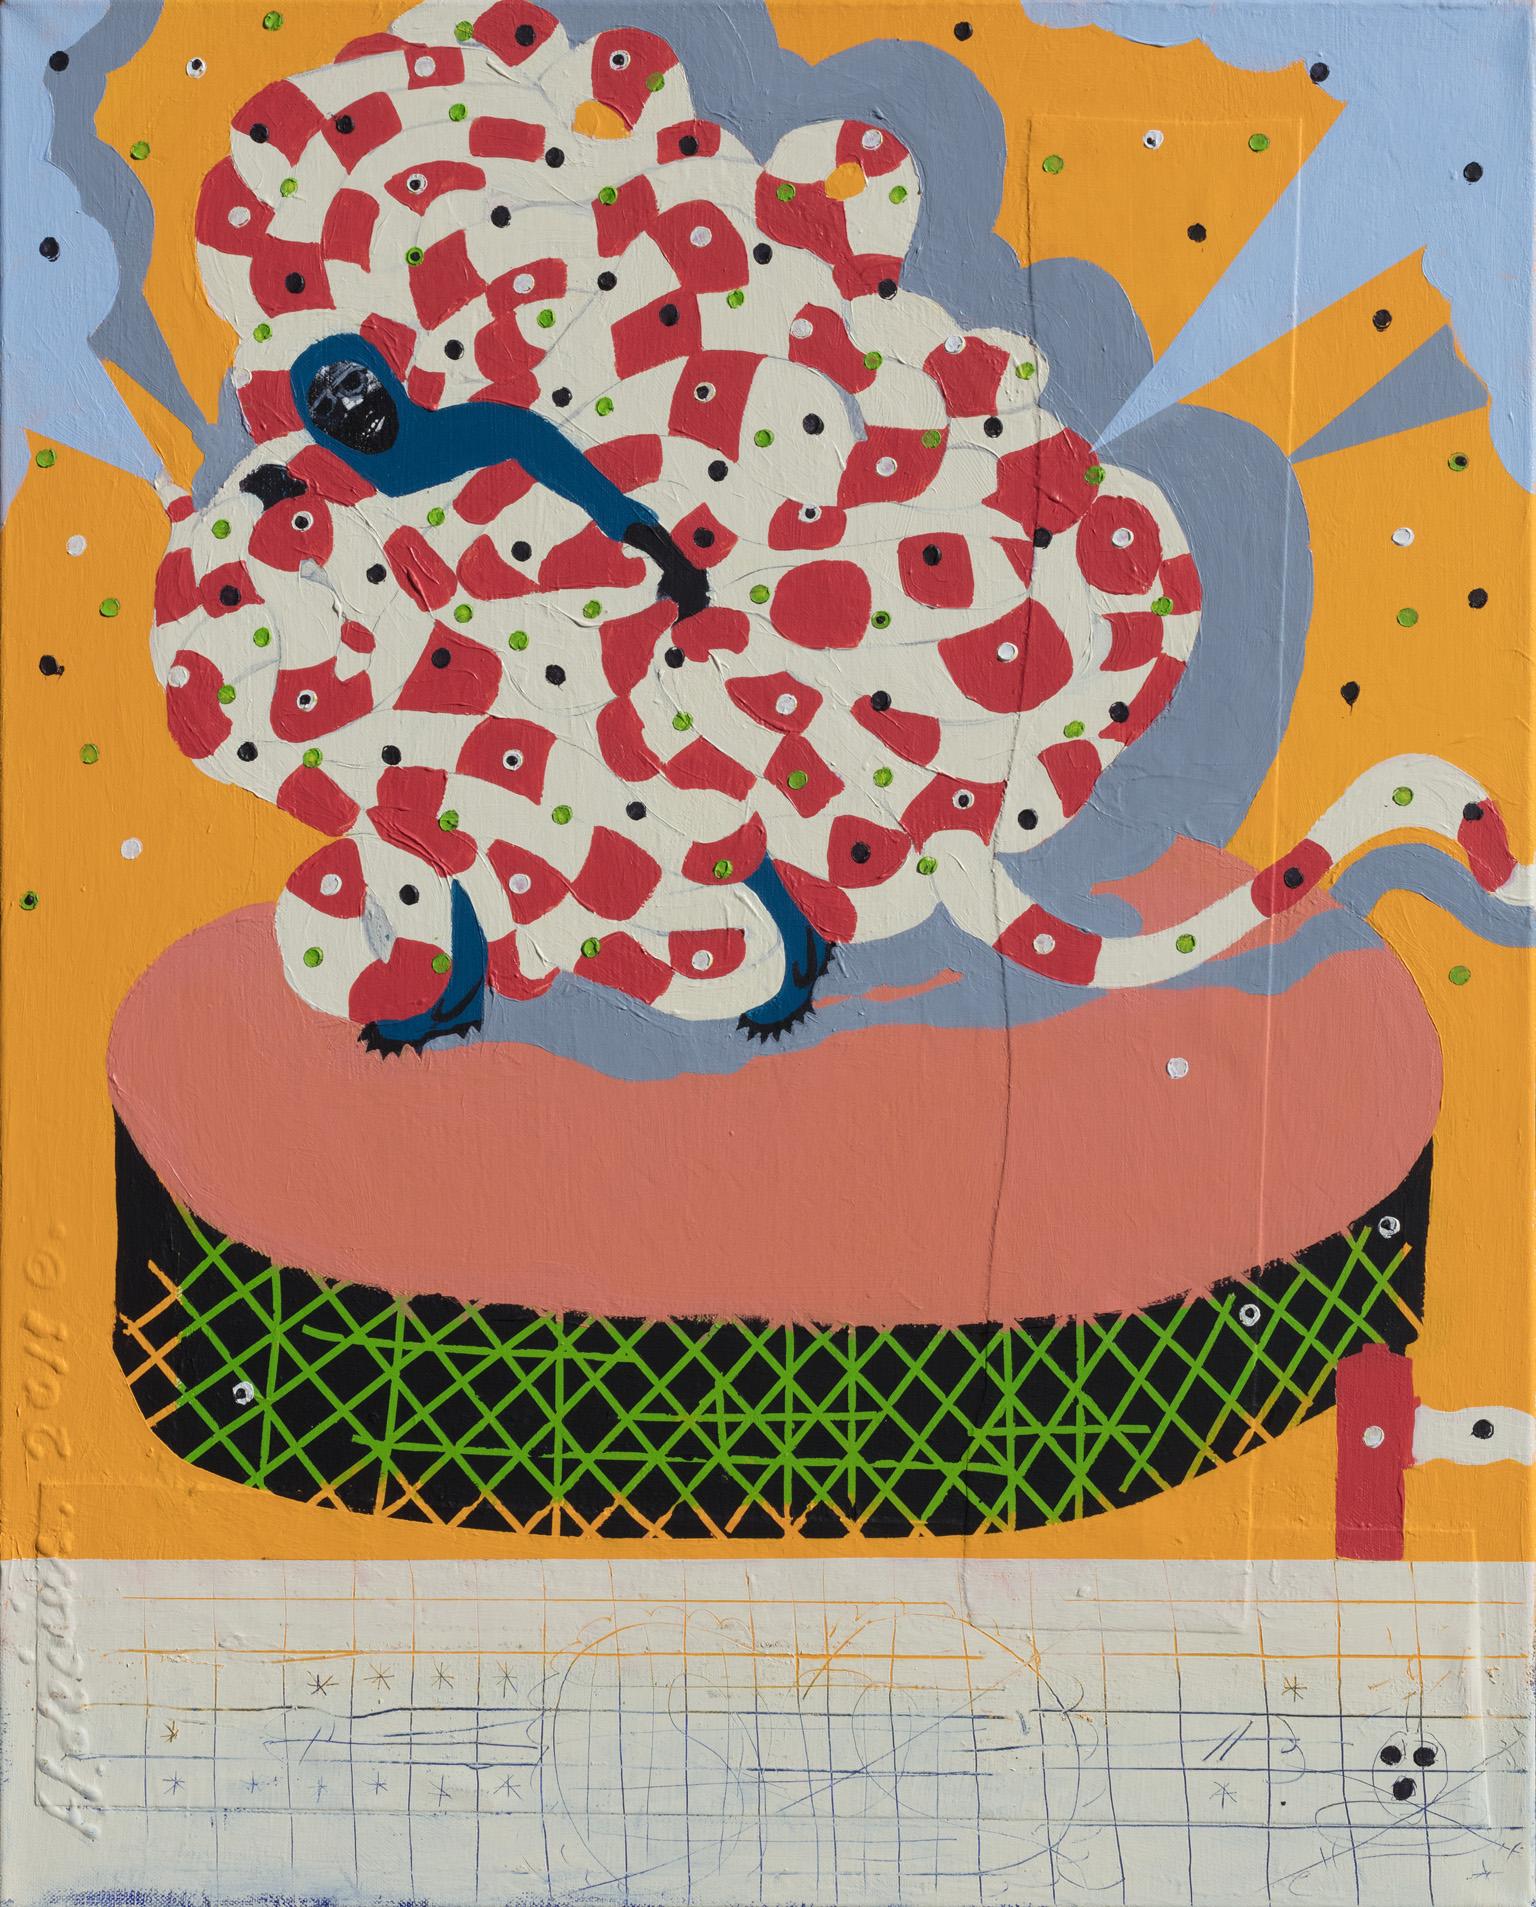 Francks Deceus’ “Mumbo Jumbo NYC#7” is a 30 x 24 inch acrylic paint, color pencil, and collage painting on canvas. The main colors are pink, orange and blue. The image is very playful, showing figures warped in a fire hose. The title “Mumbo Jumbo",